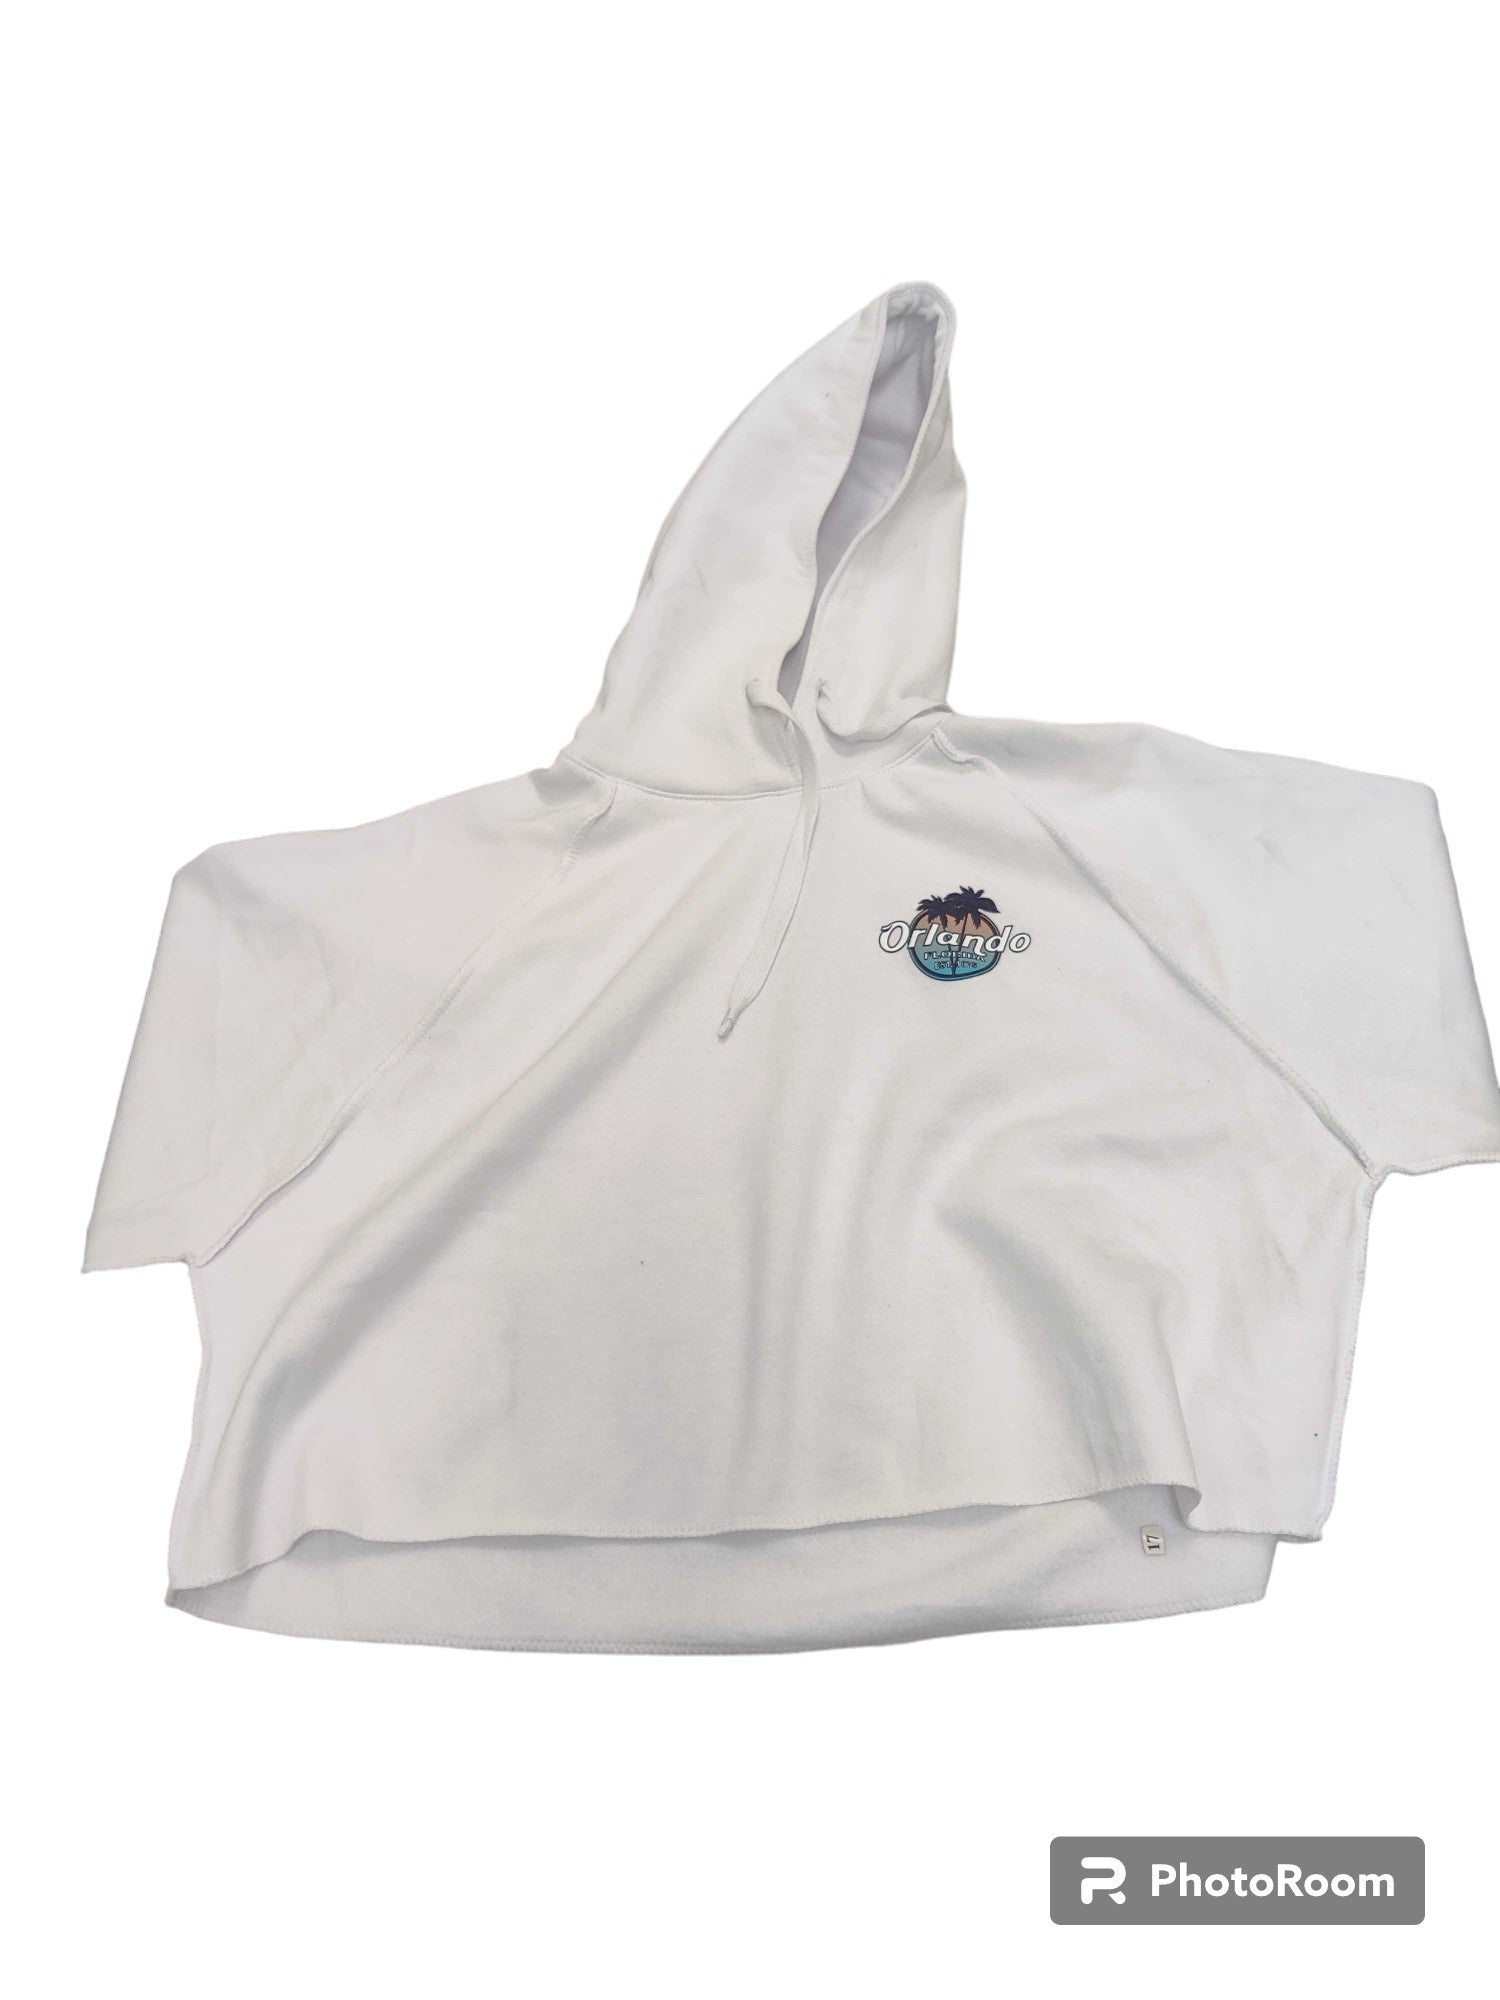 Orlando White Hoodie Without Zipper No Patch